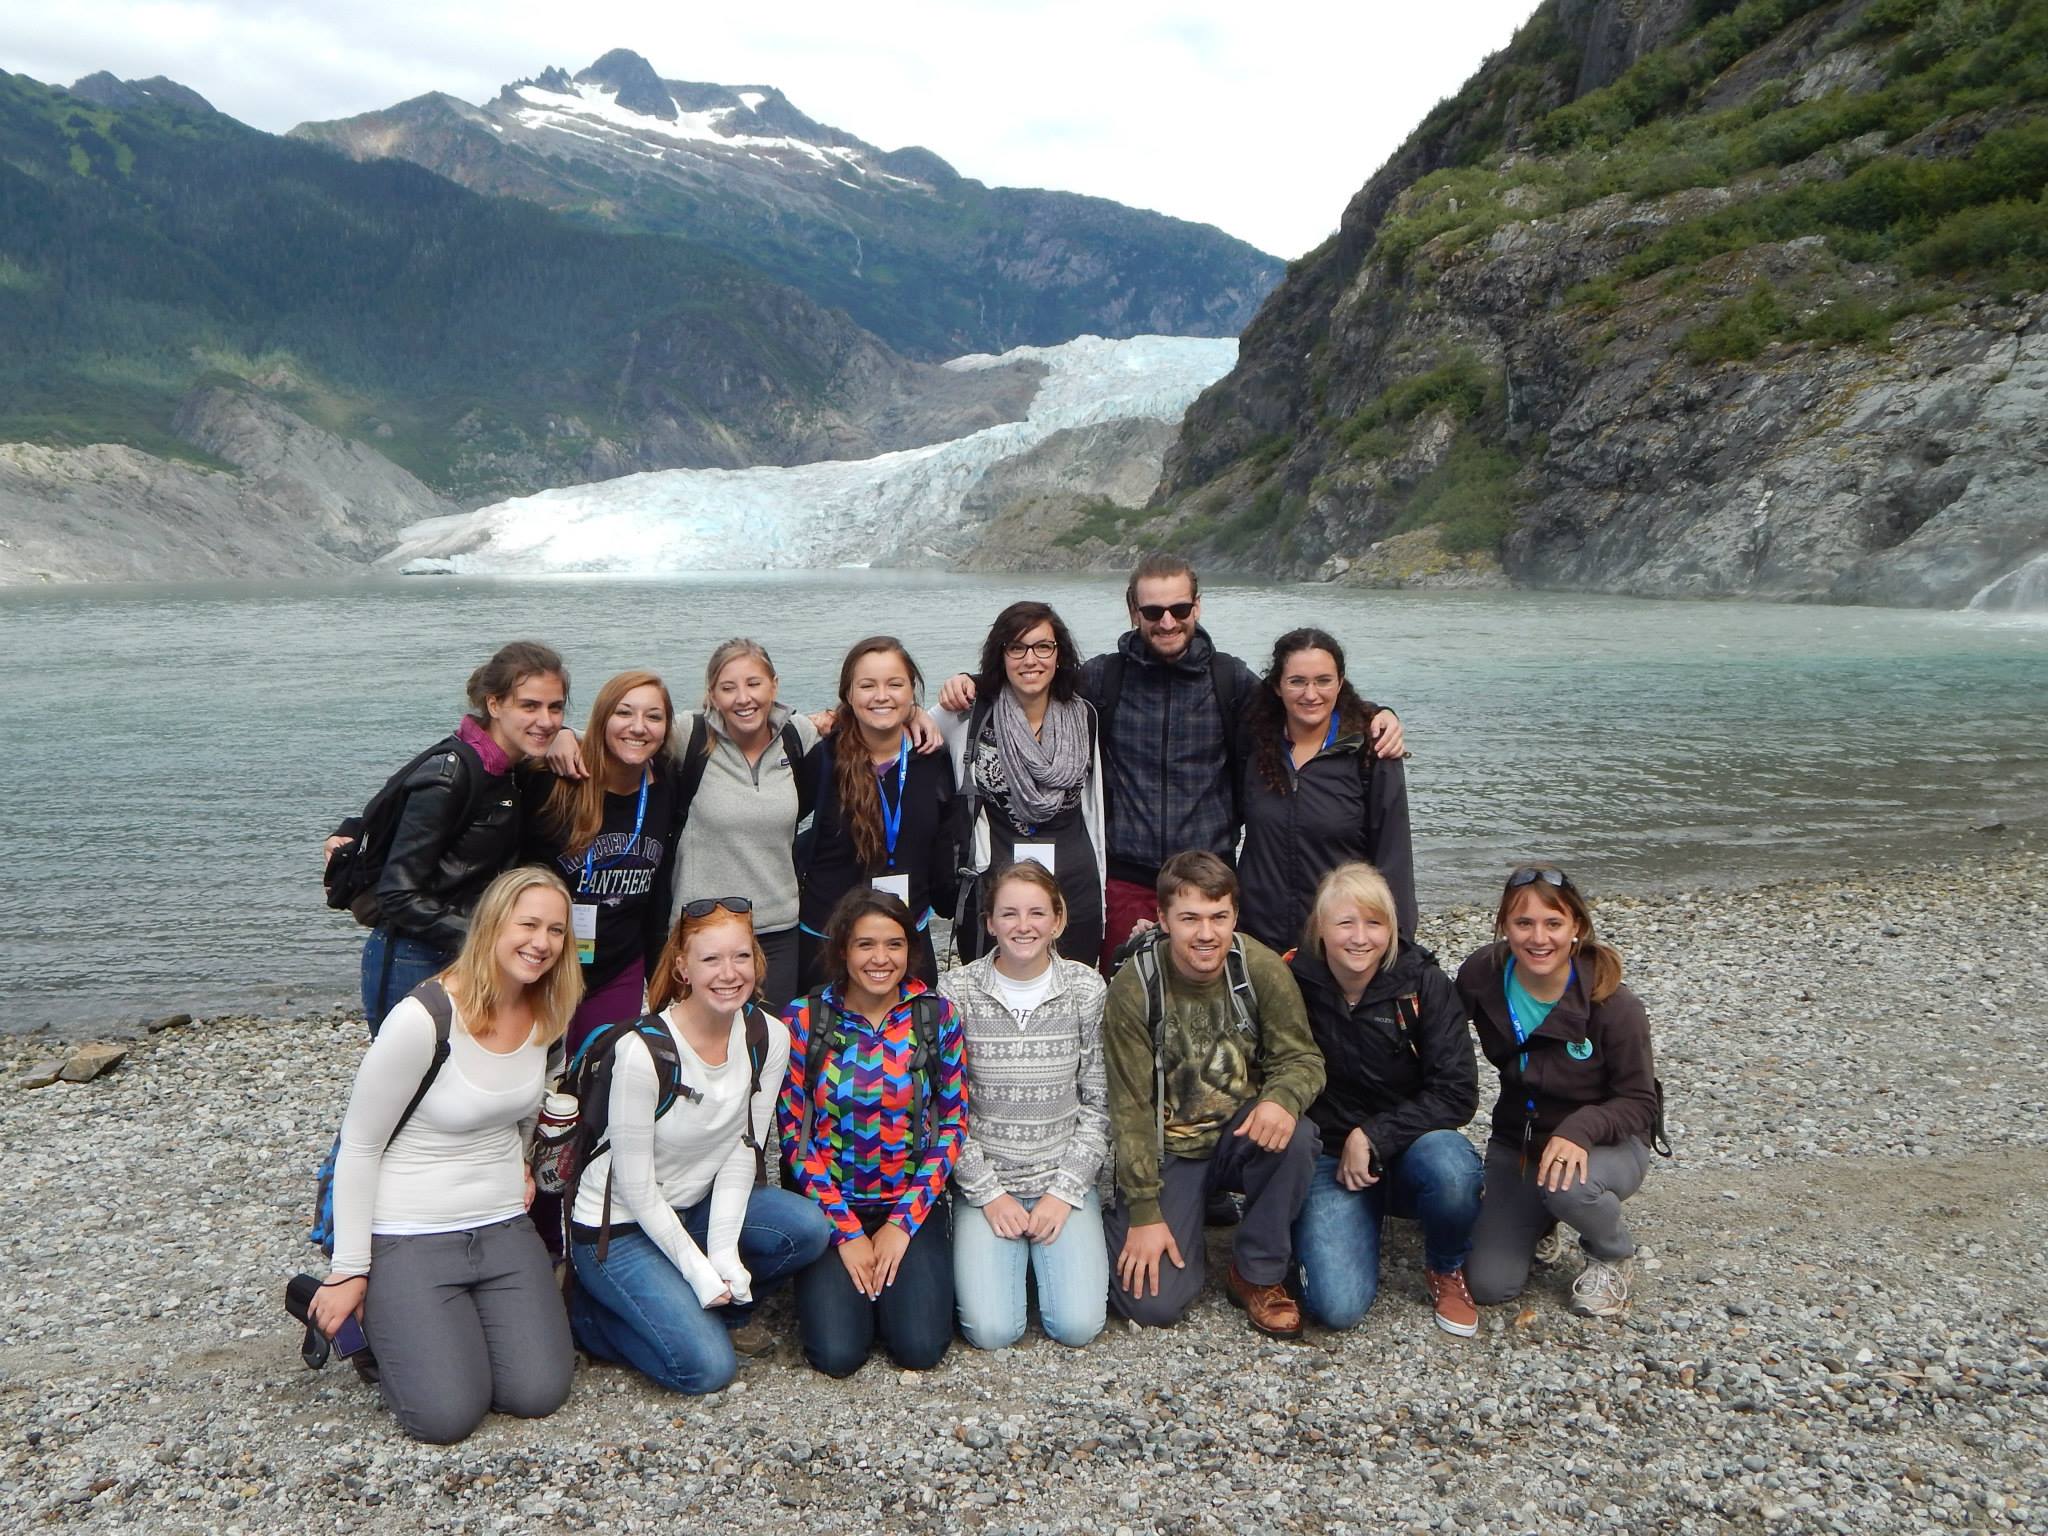 Group of students posing in front of water and a glacier